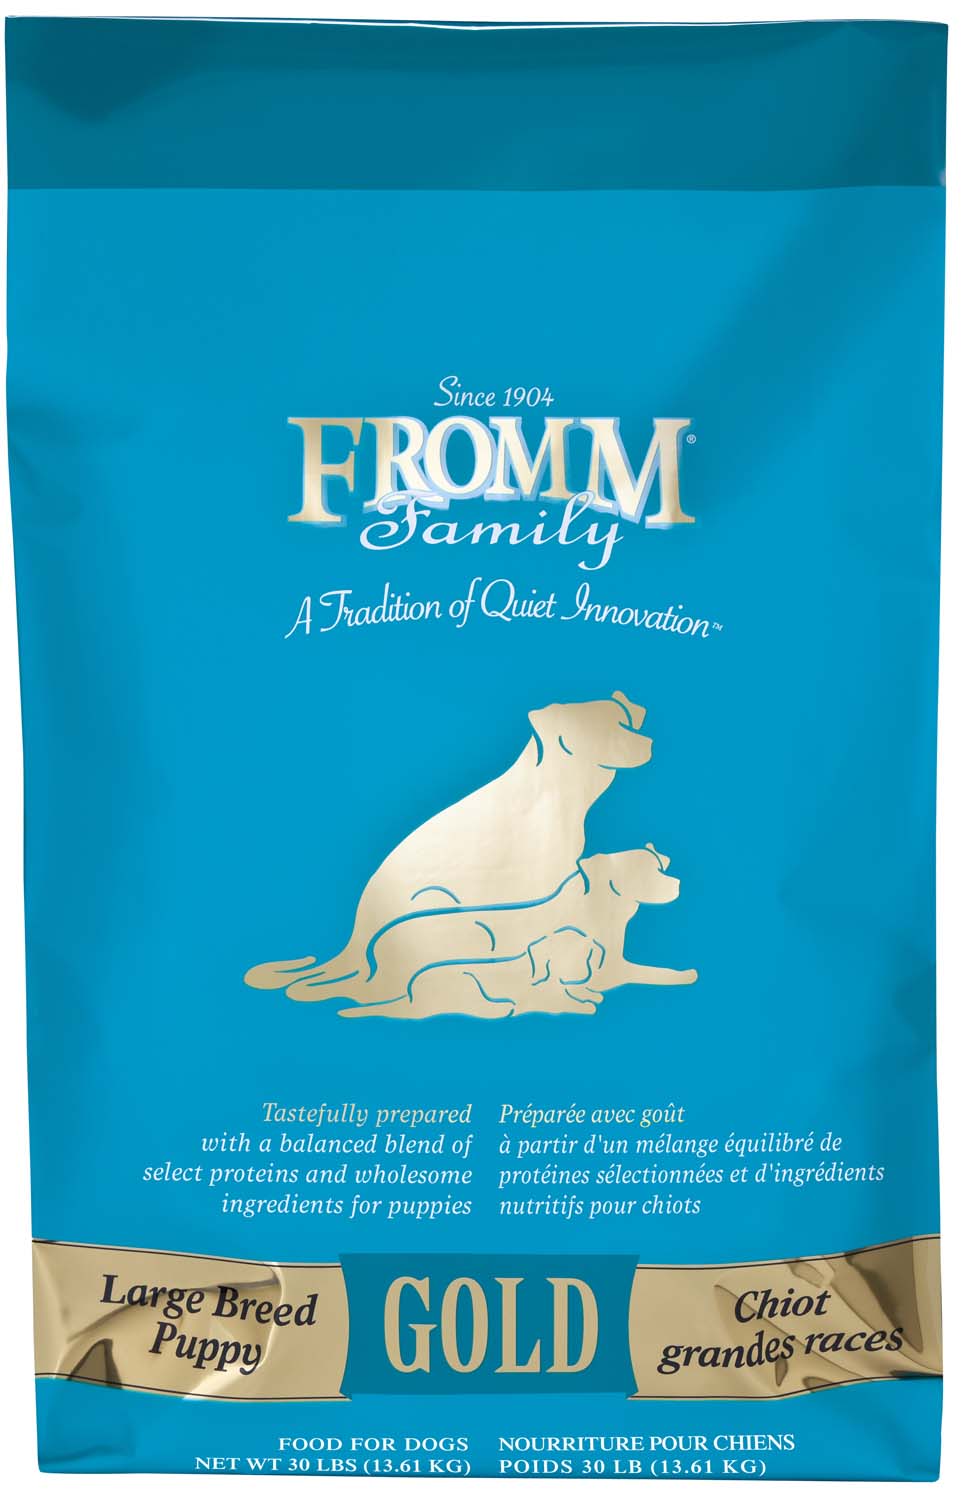 Fromm Family Large Breed Puppy Gold Food for Dogs, 30 lbs